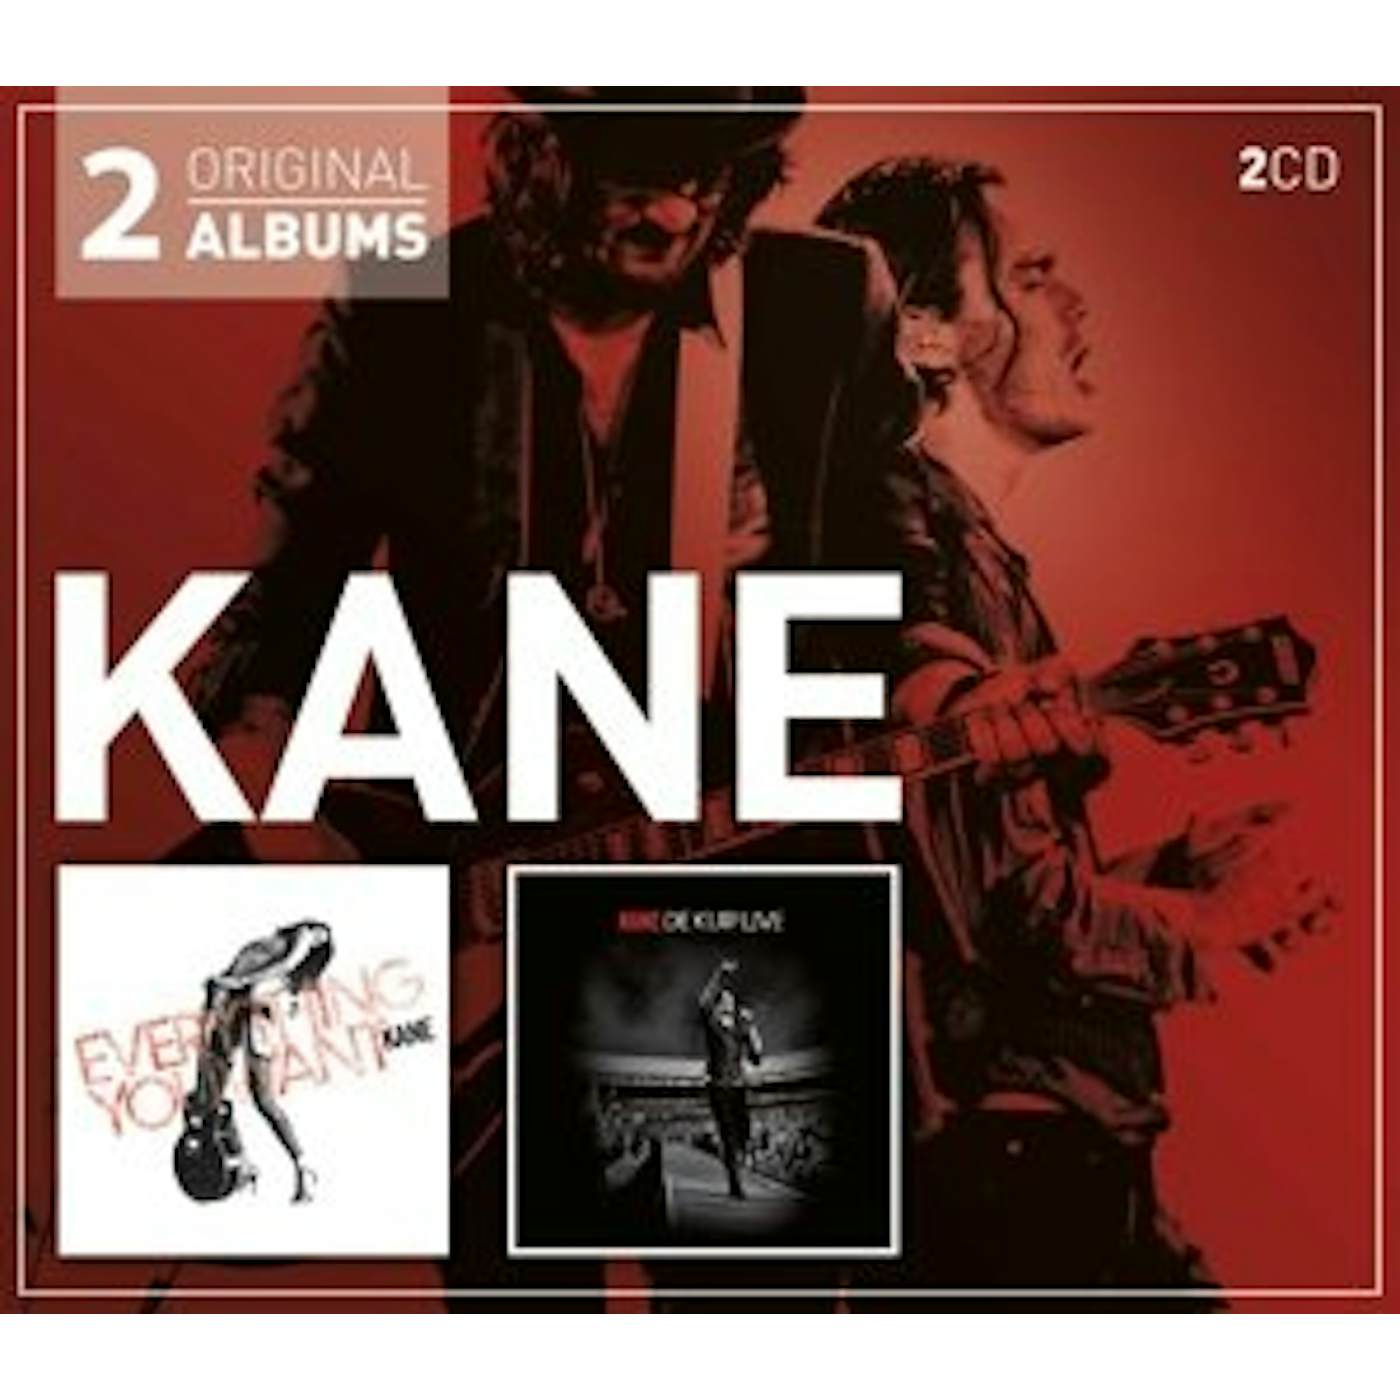 KANE EVERYTHING YOU WANT / DE KUIP LIVE CD